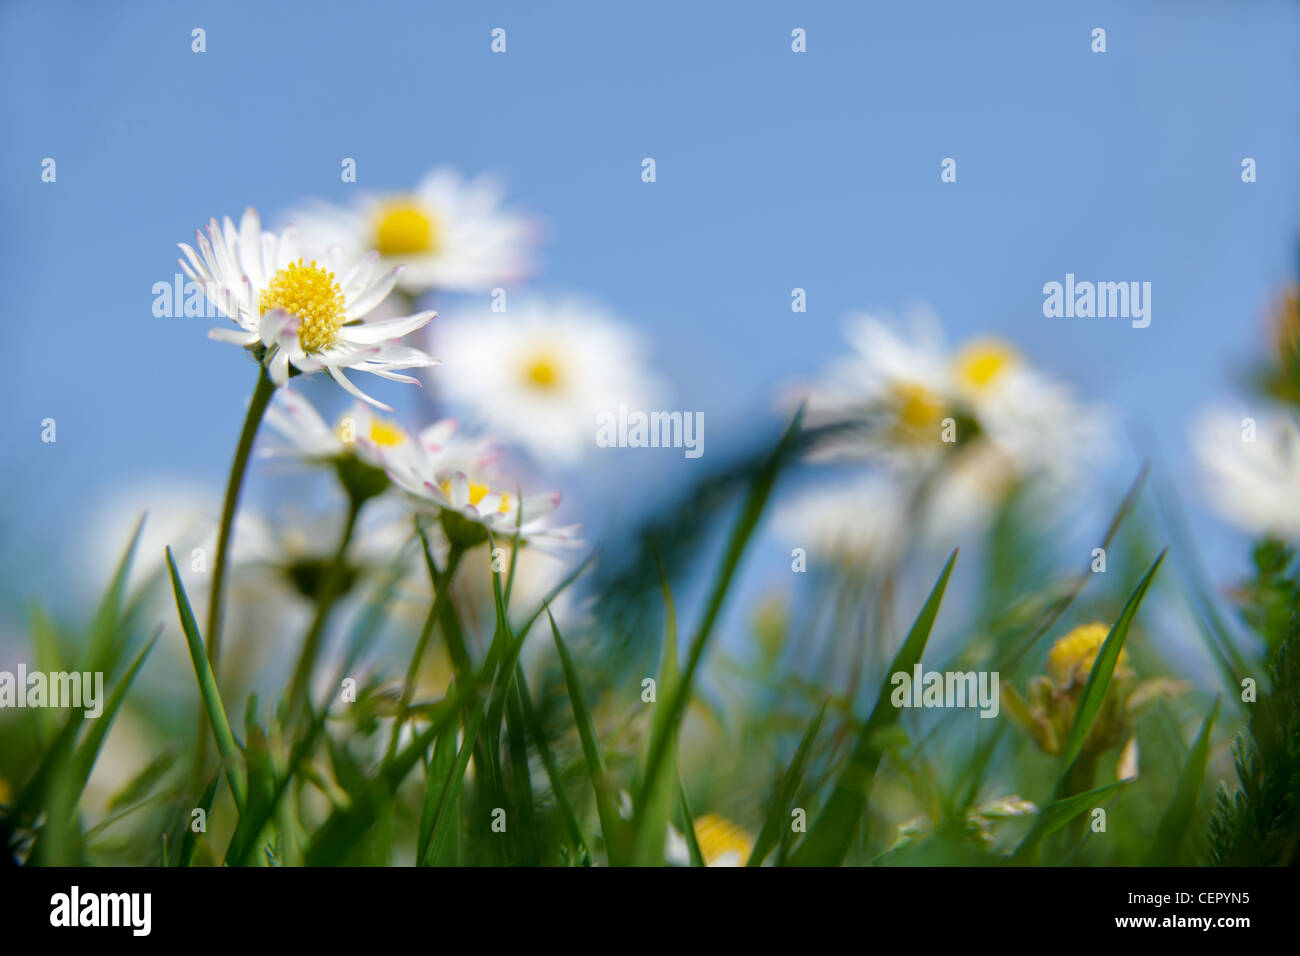 Close-up of Daisies growing in grass against a blue sky. Stock Photo